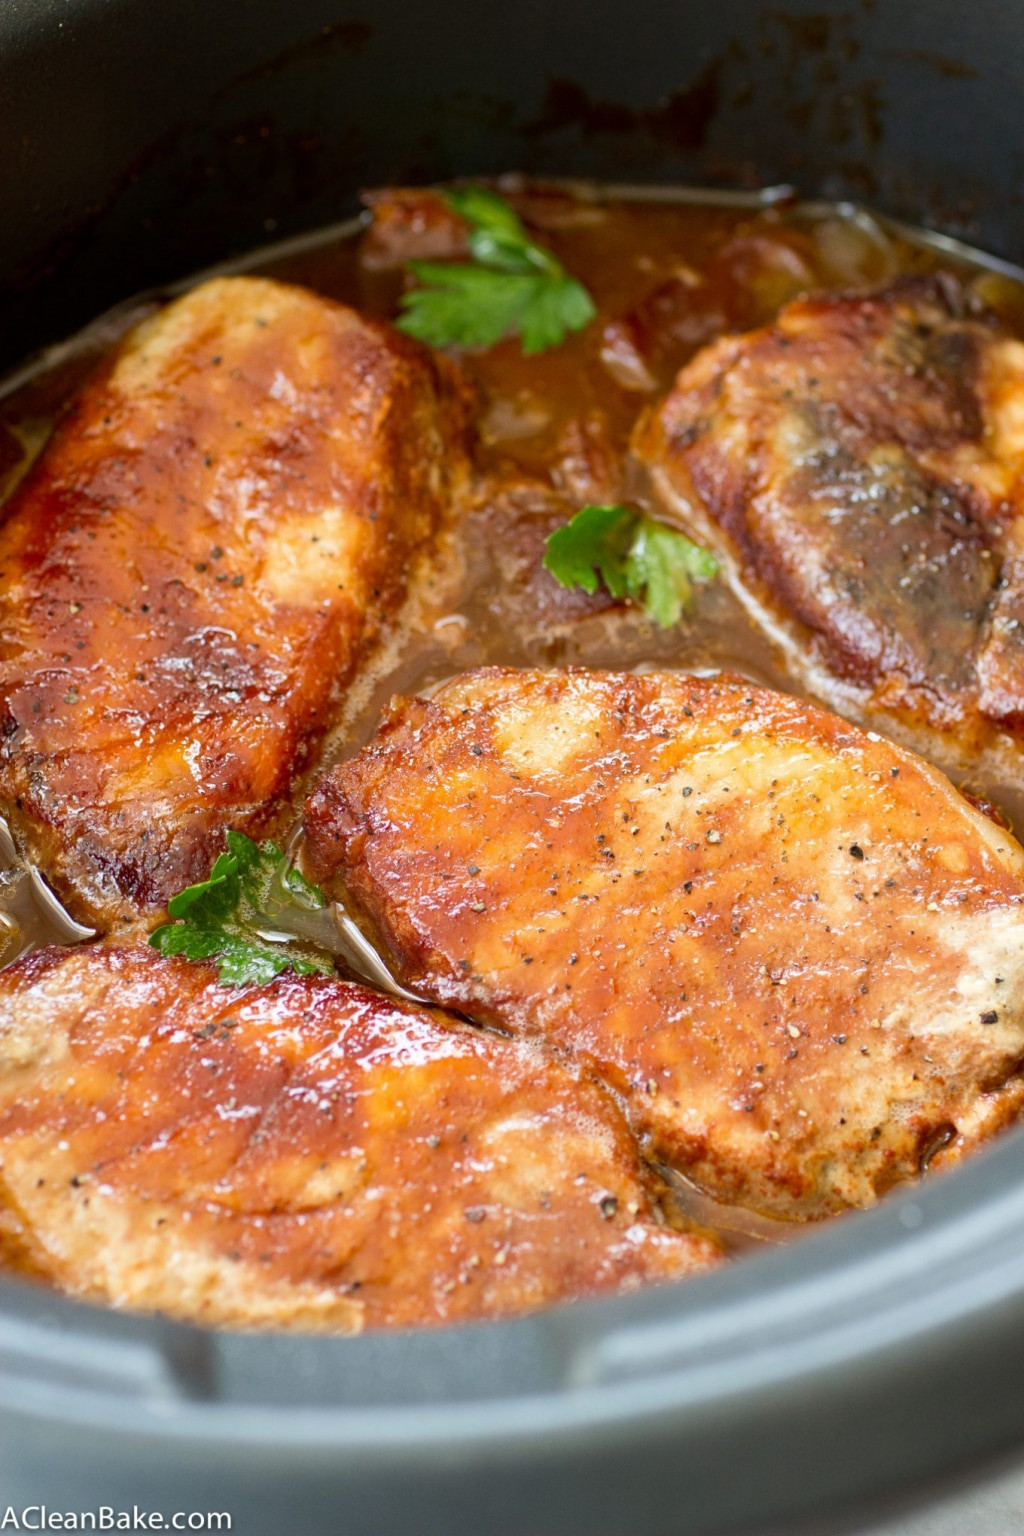 Recipes Pork Chops
 Crockpot Pork Chops with Apples and ions